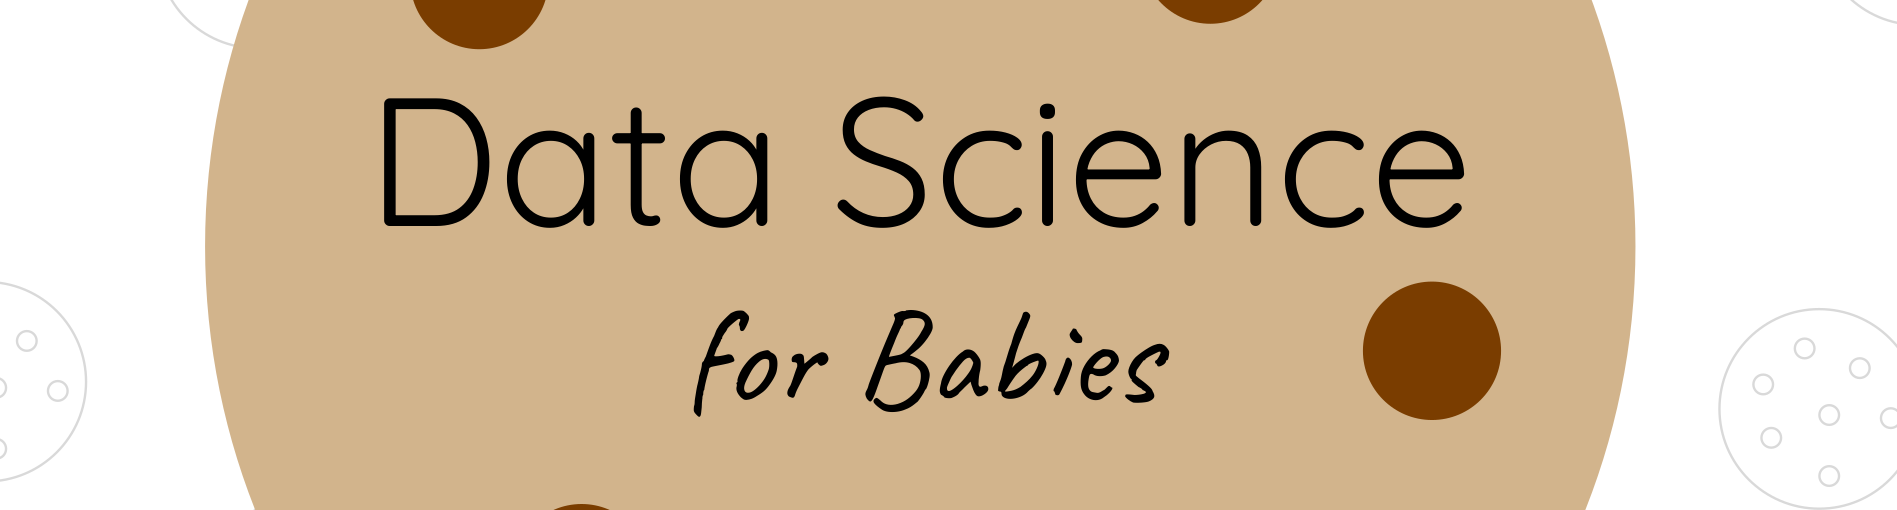 Data Science for Babies image